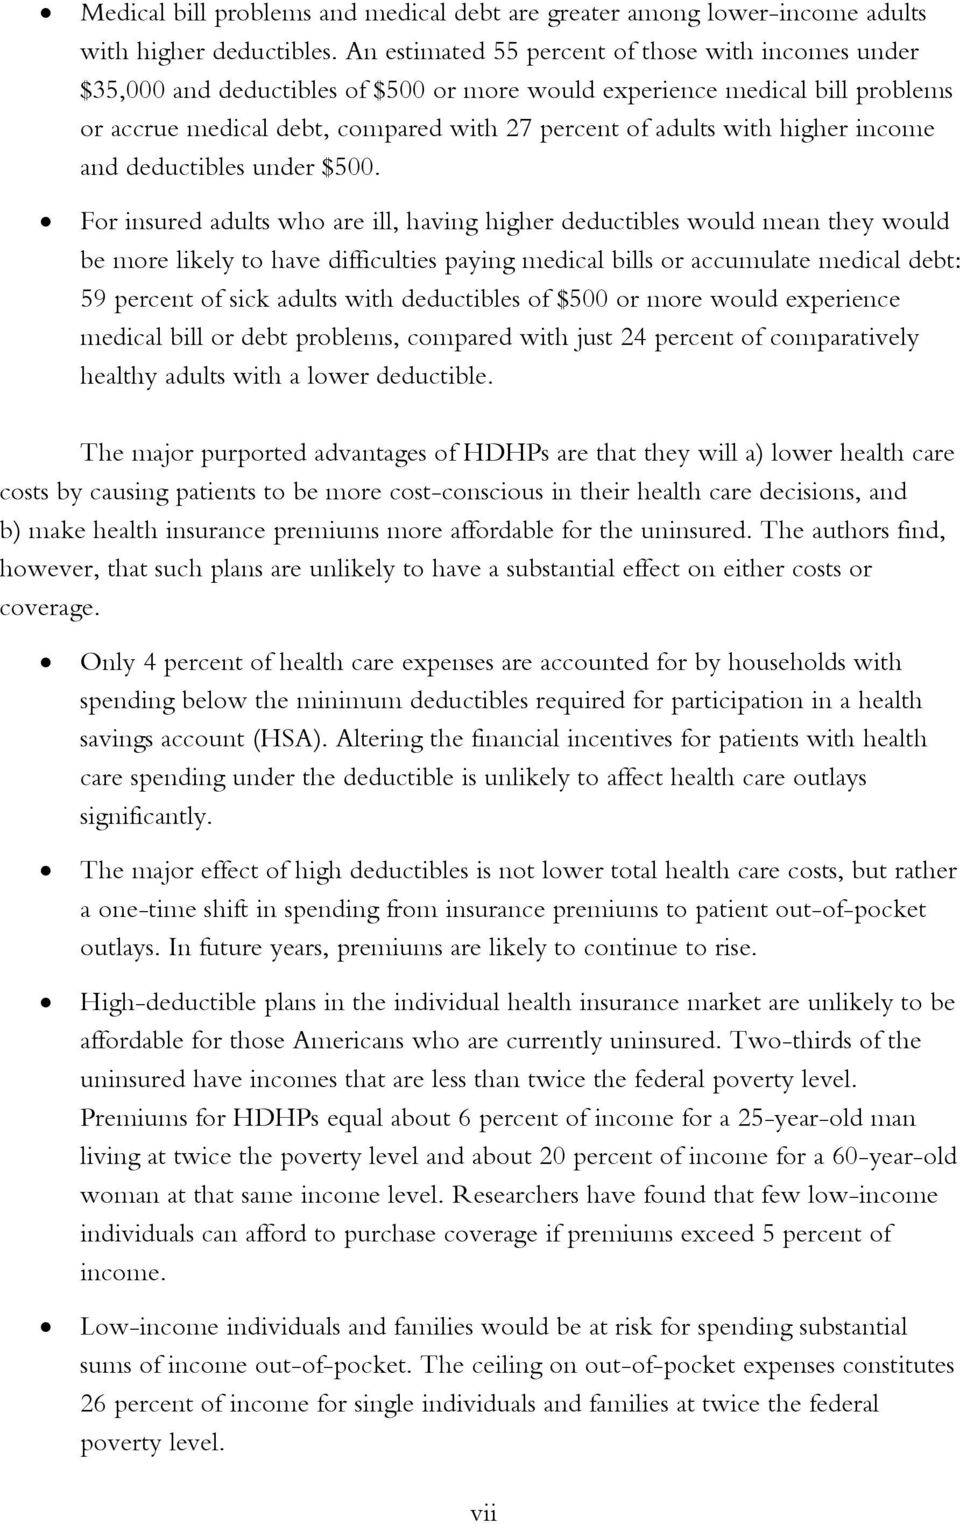 higher income and deductibles under $500.